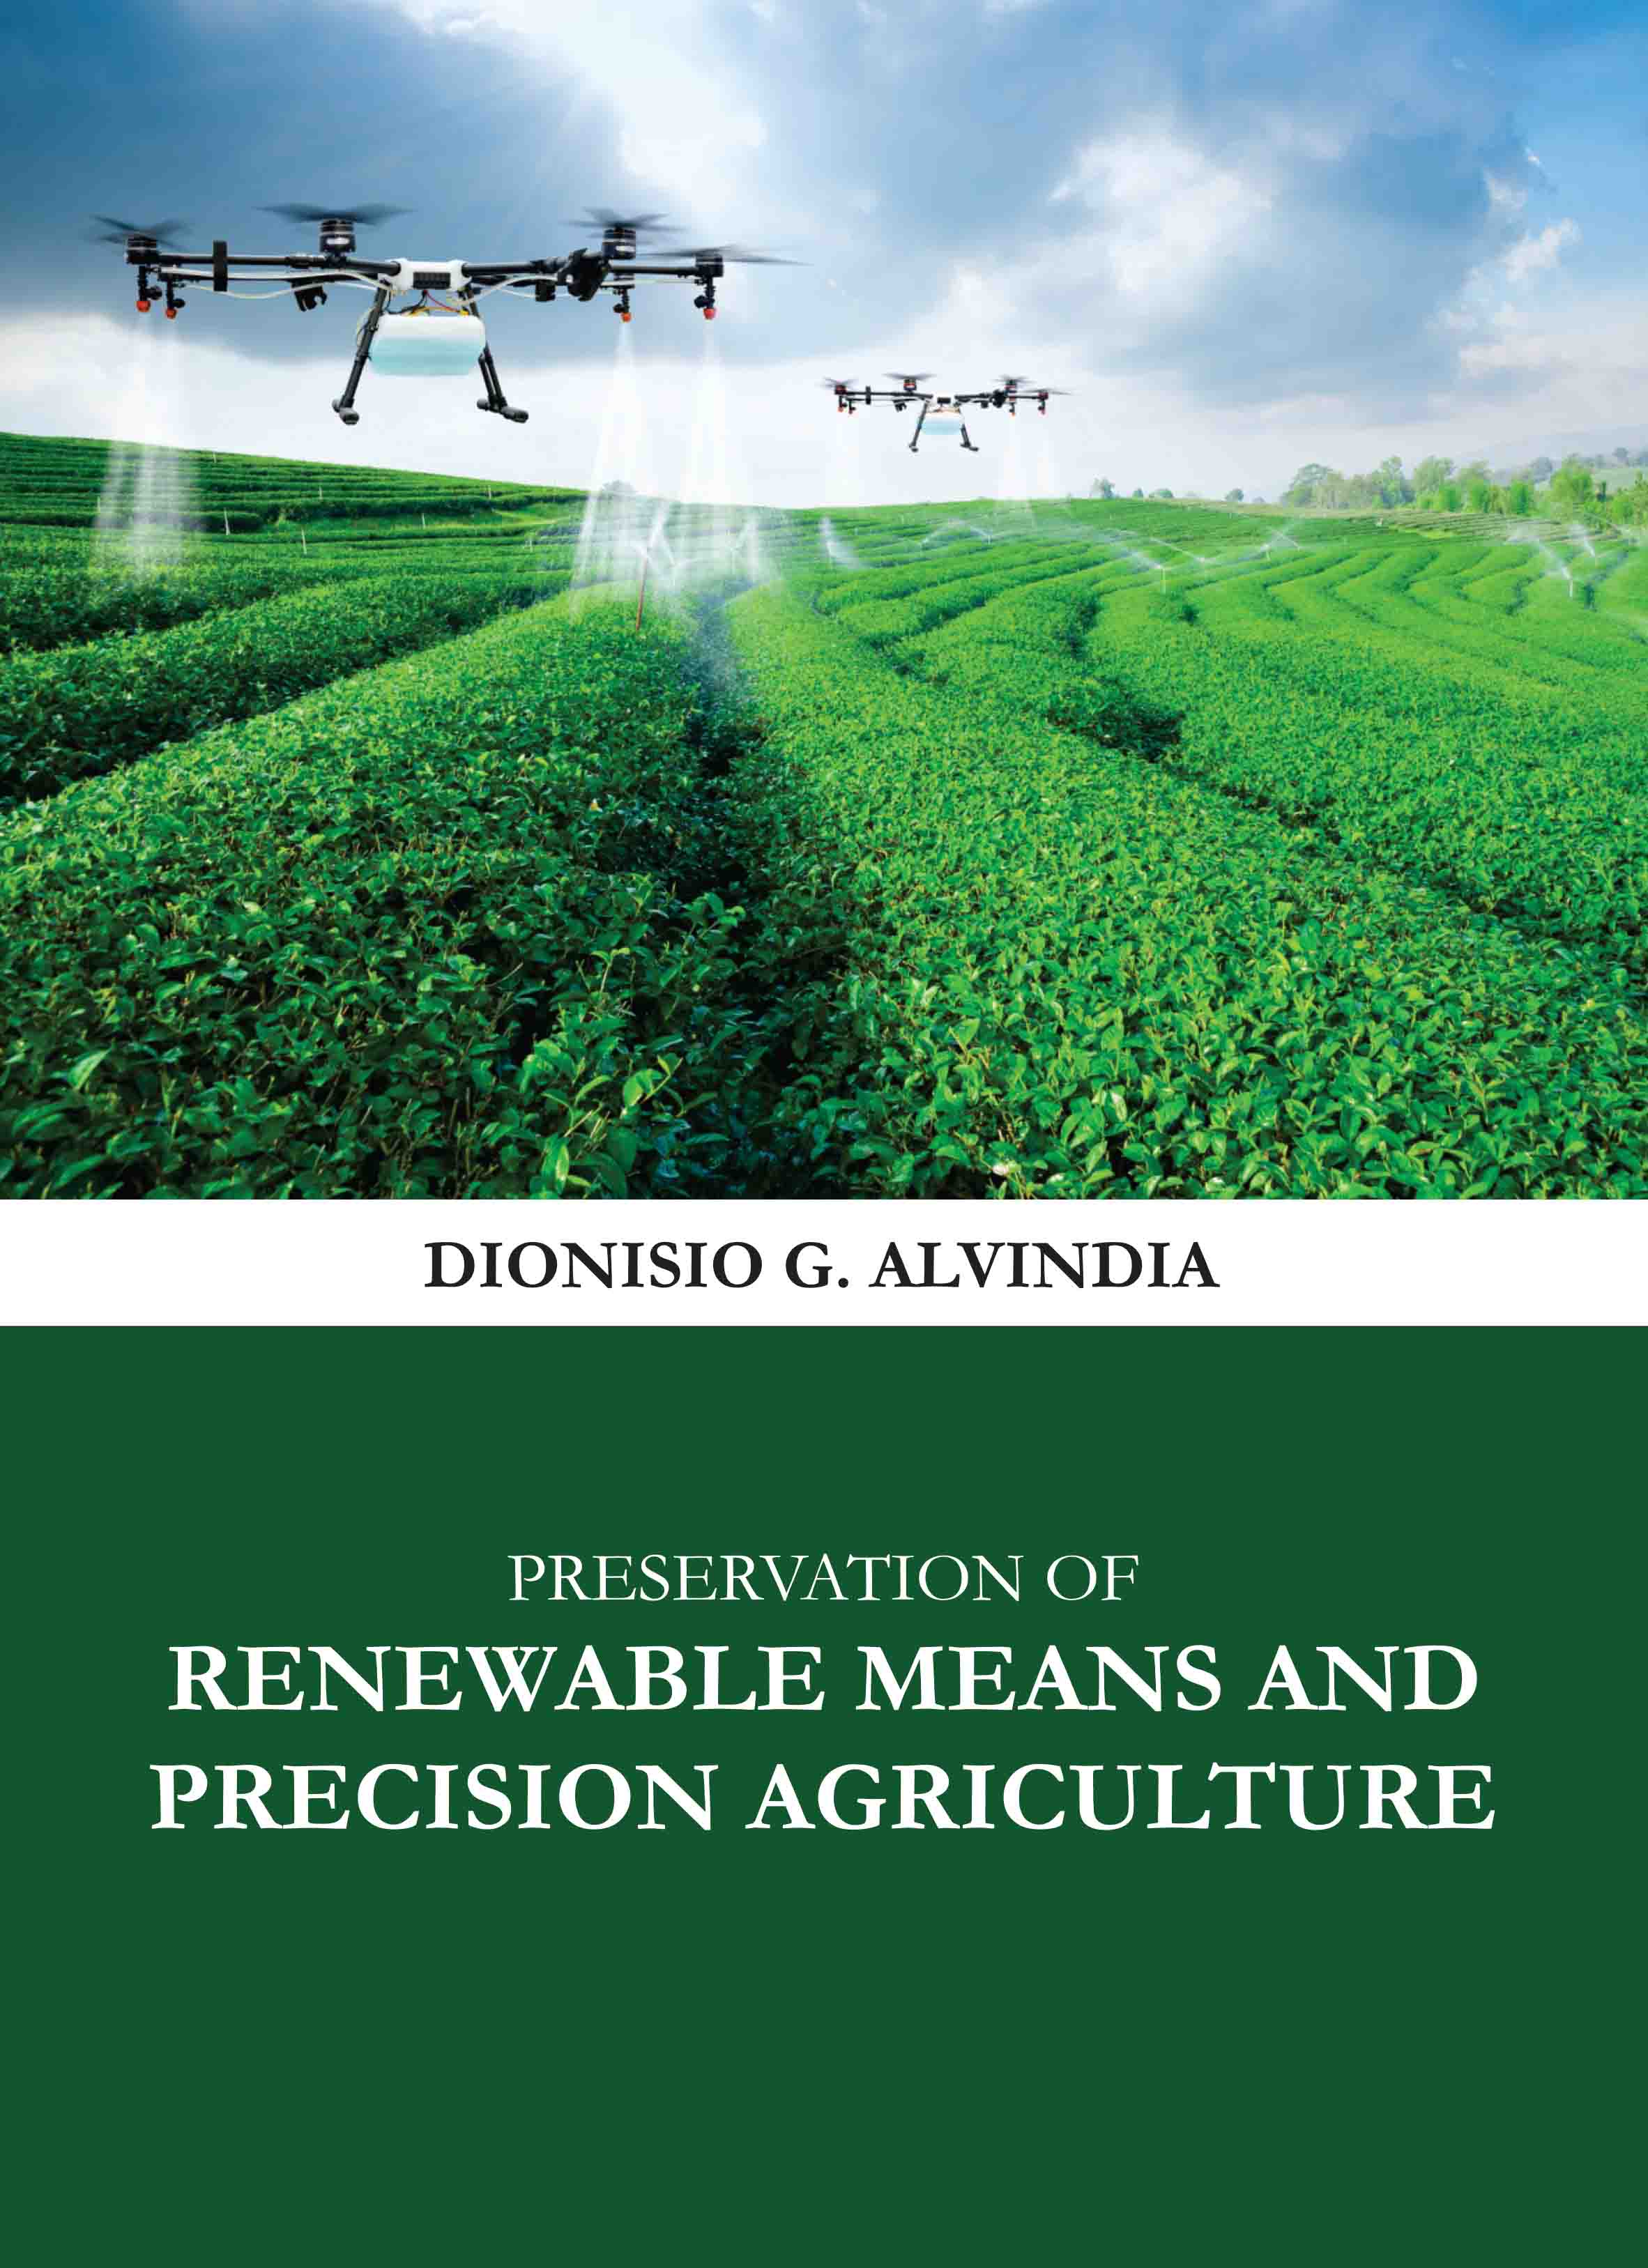 Preservation of Renewable Means and Precision Agriculture